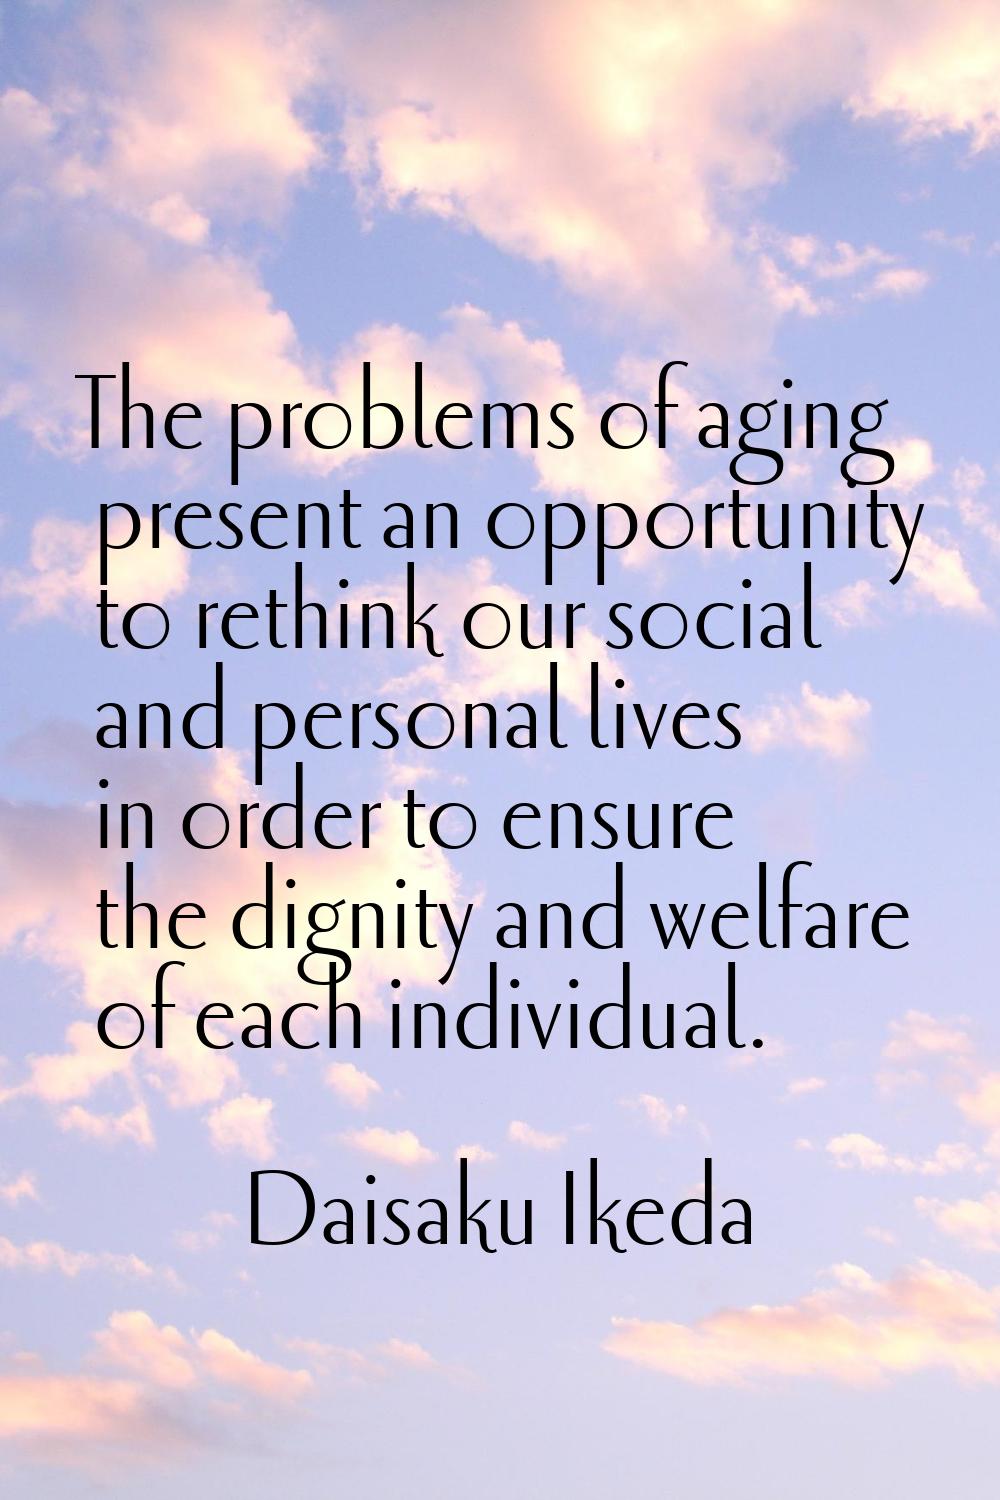 The problems of aging present an opportunity to rethink our social and personal lives in order to e